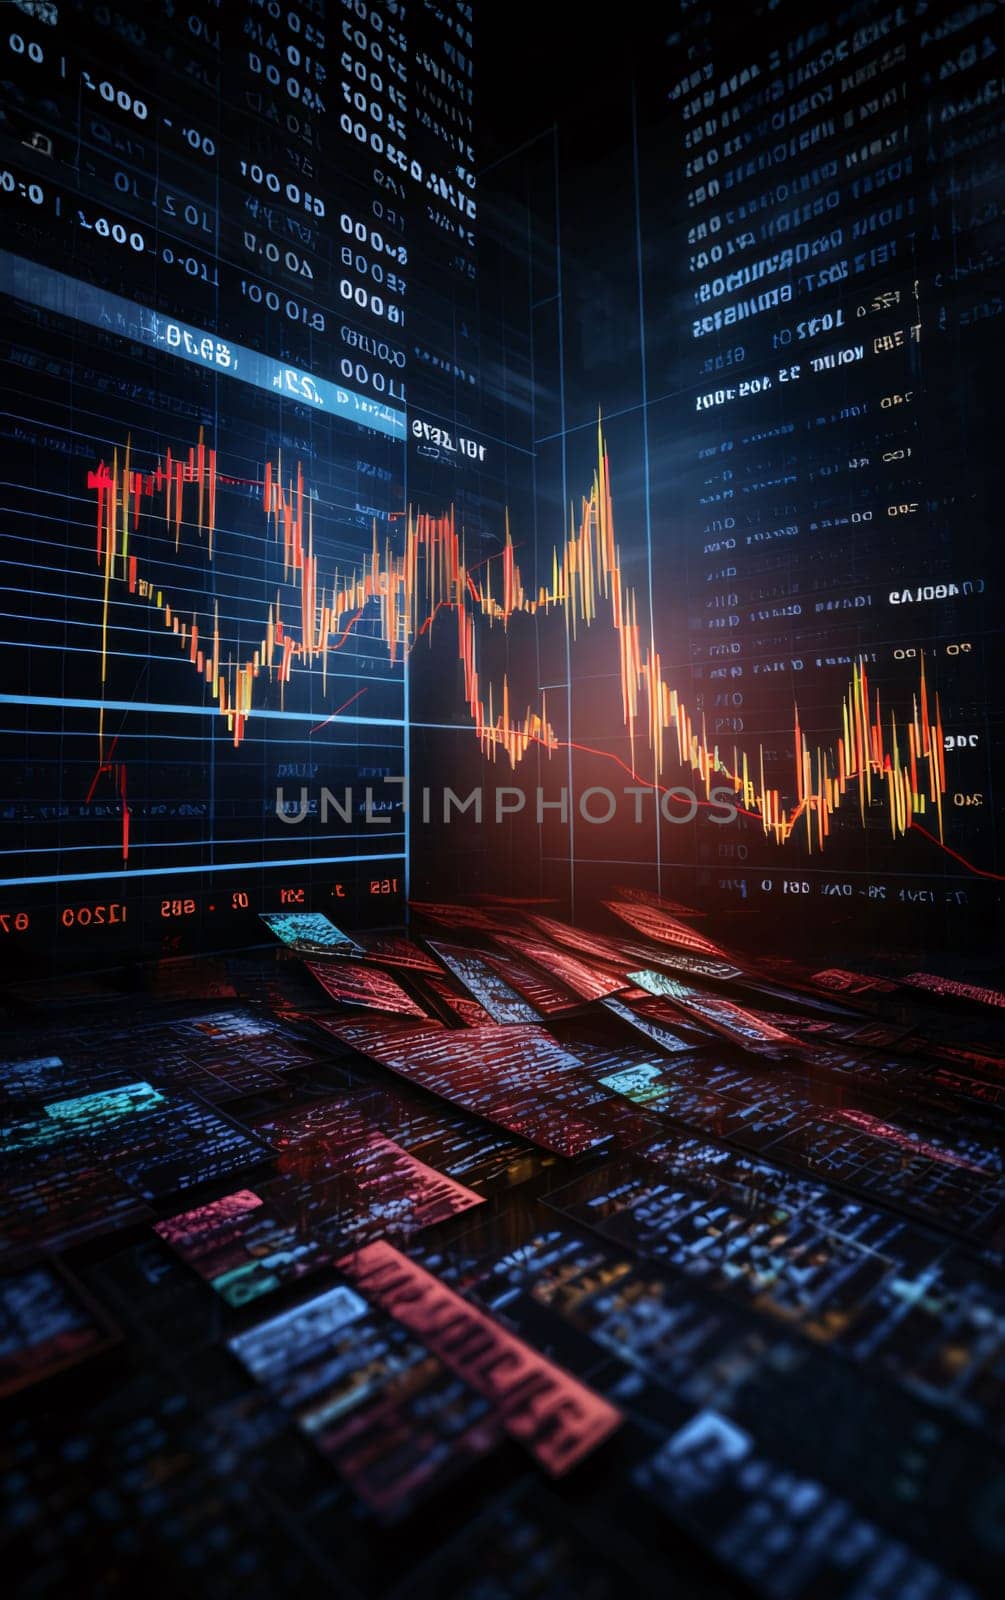 Stock Market: financial stock market graph on technology abstract background. Economy trends background for business idea and all art work design. Abstract finance background.